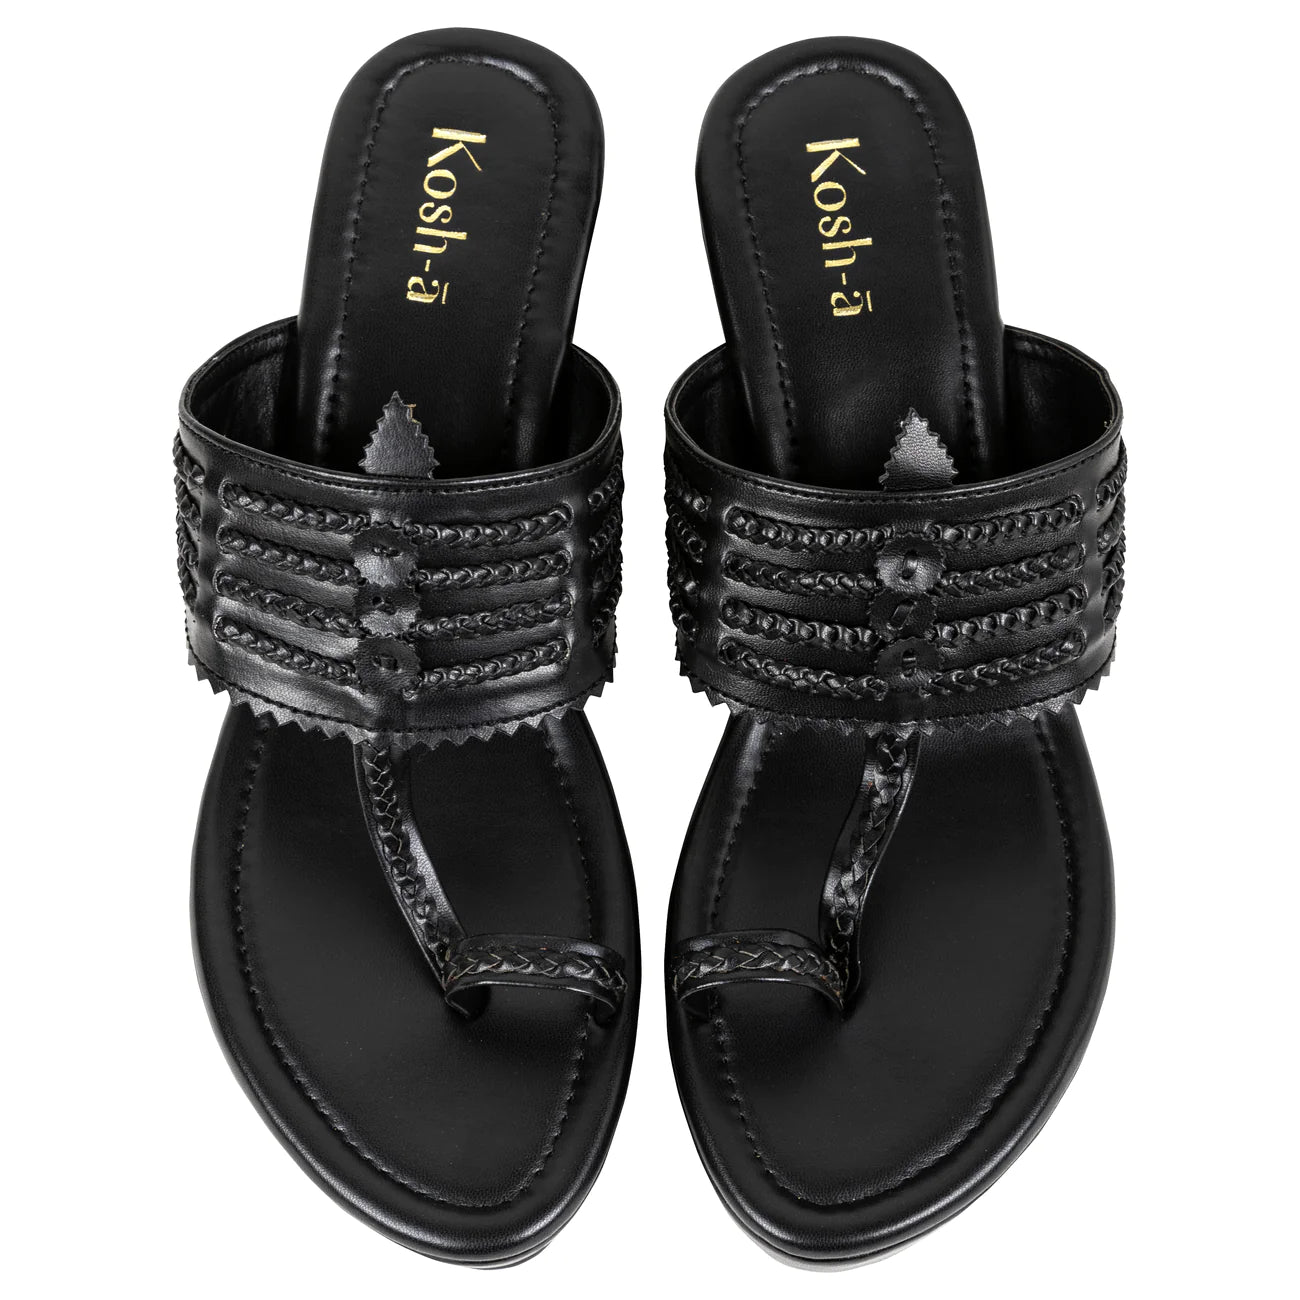 black wedge sandals for women in usa by kosh-a